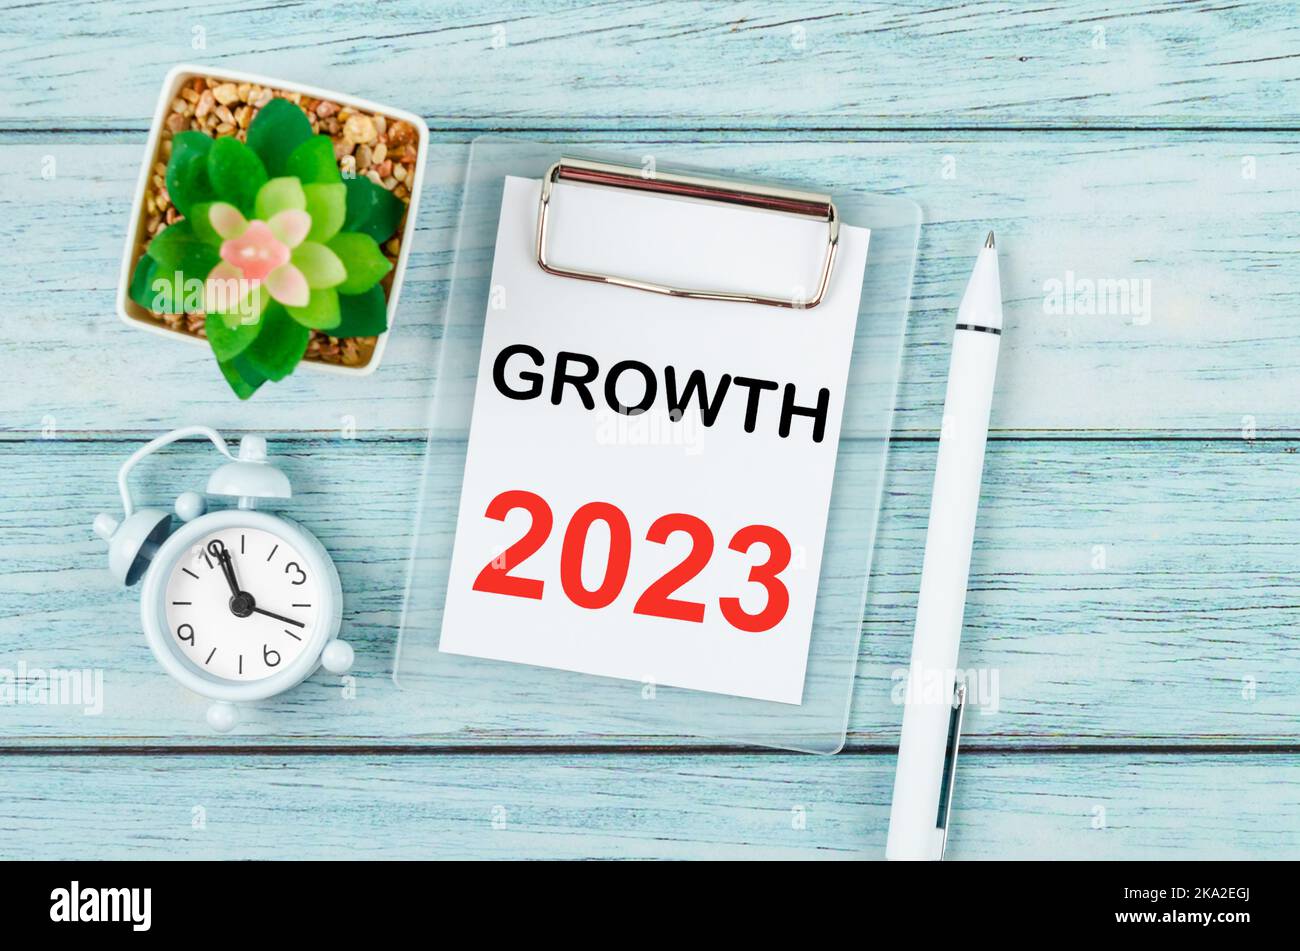 2023 Growth : Goal and Target Setting List for 2023 year with alarm clock. Change and determination concept. Stock Photo